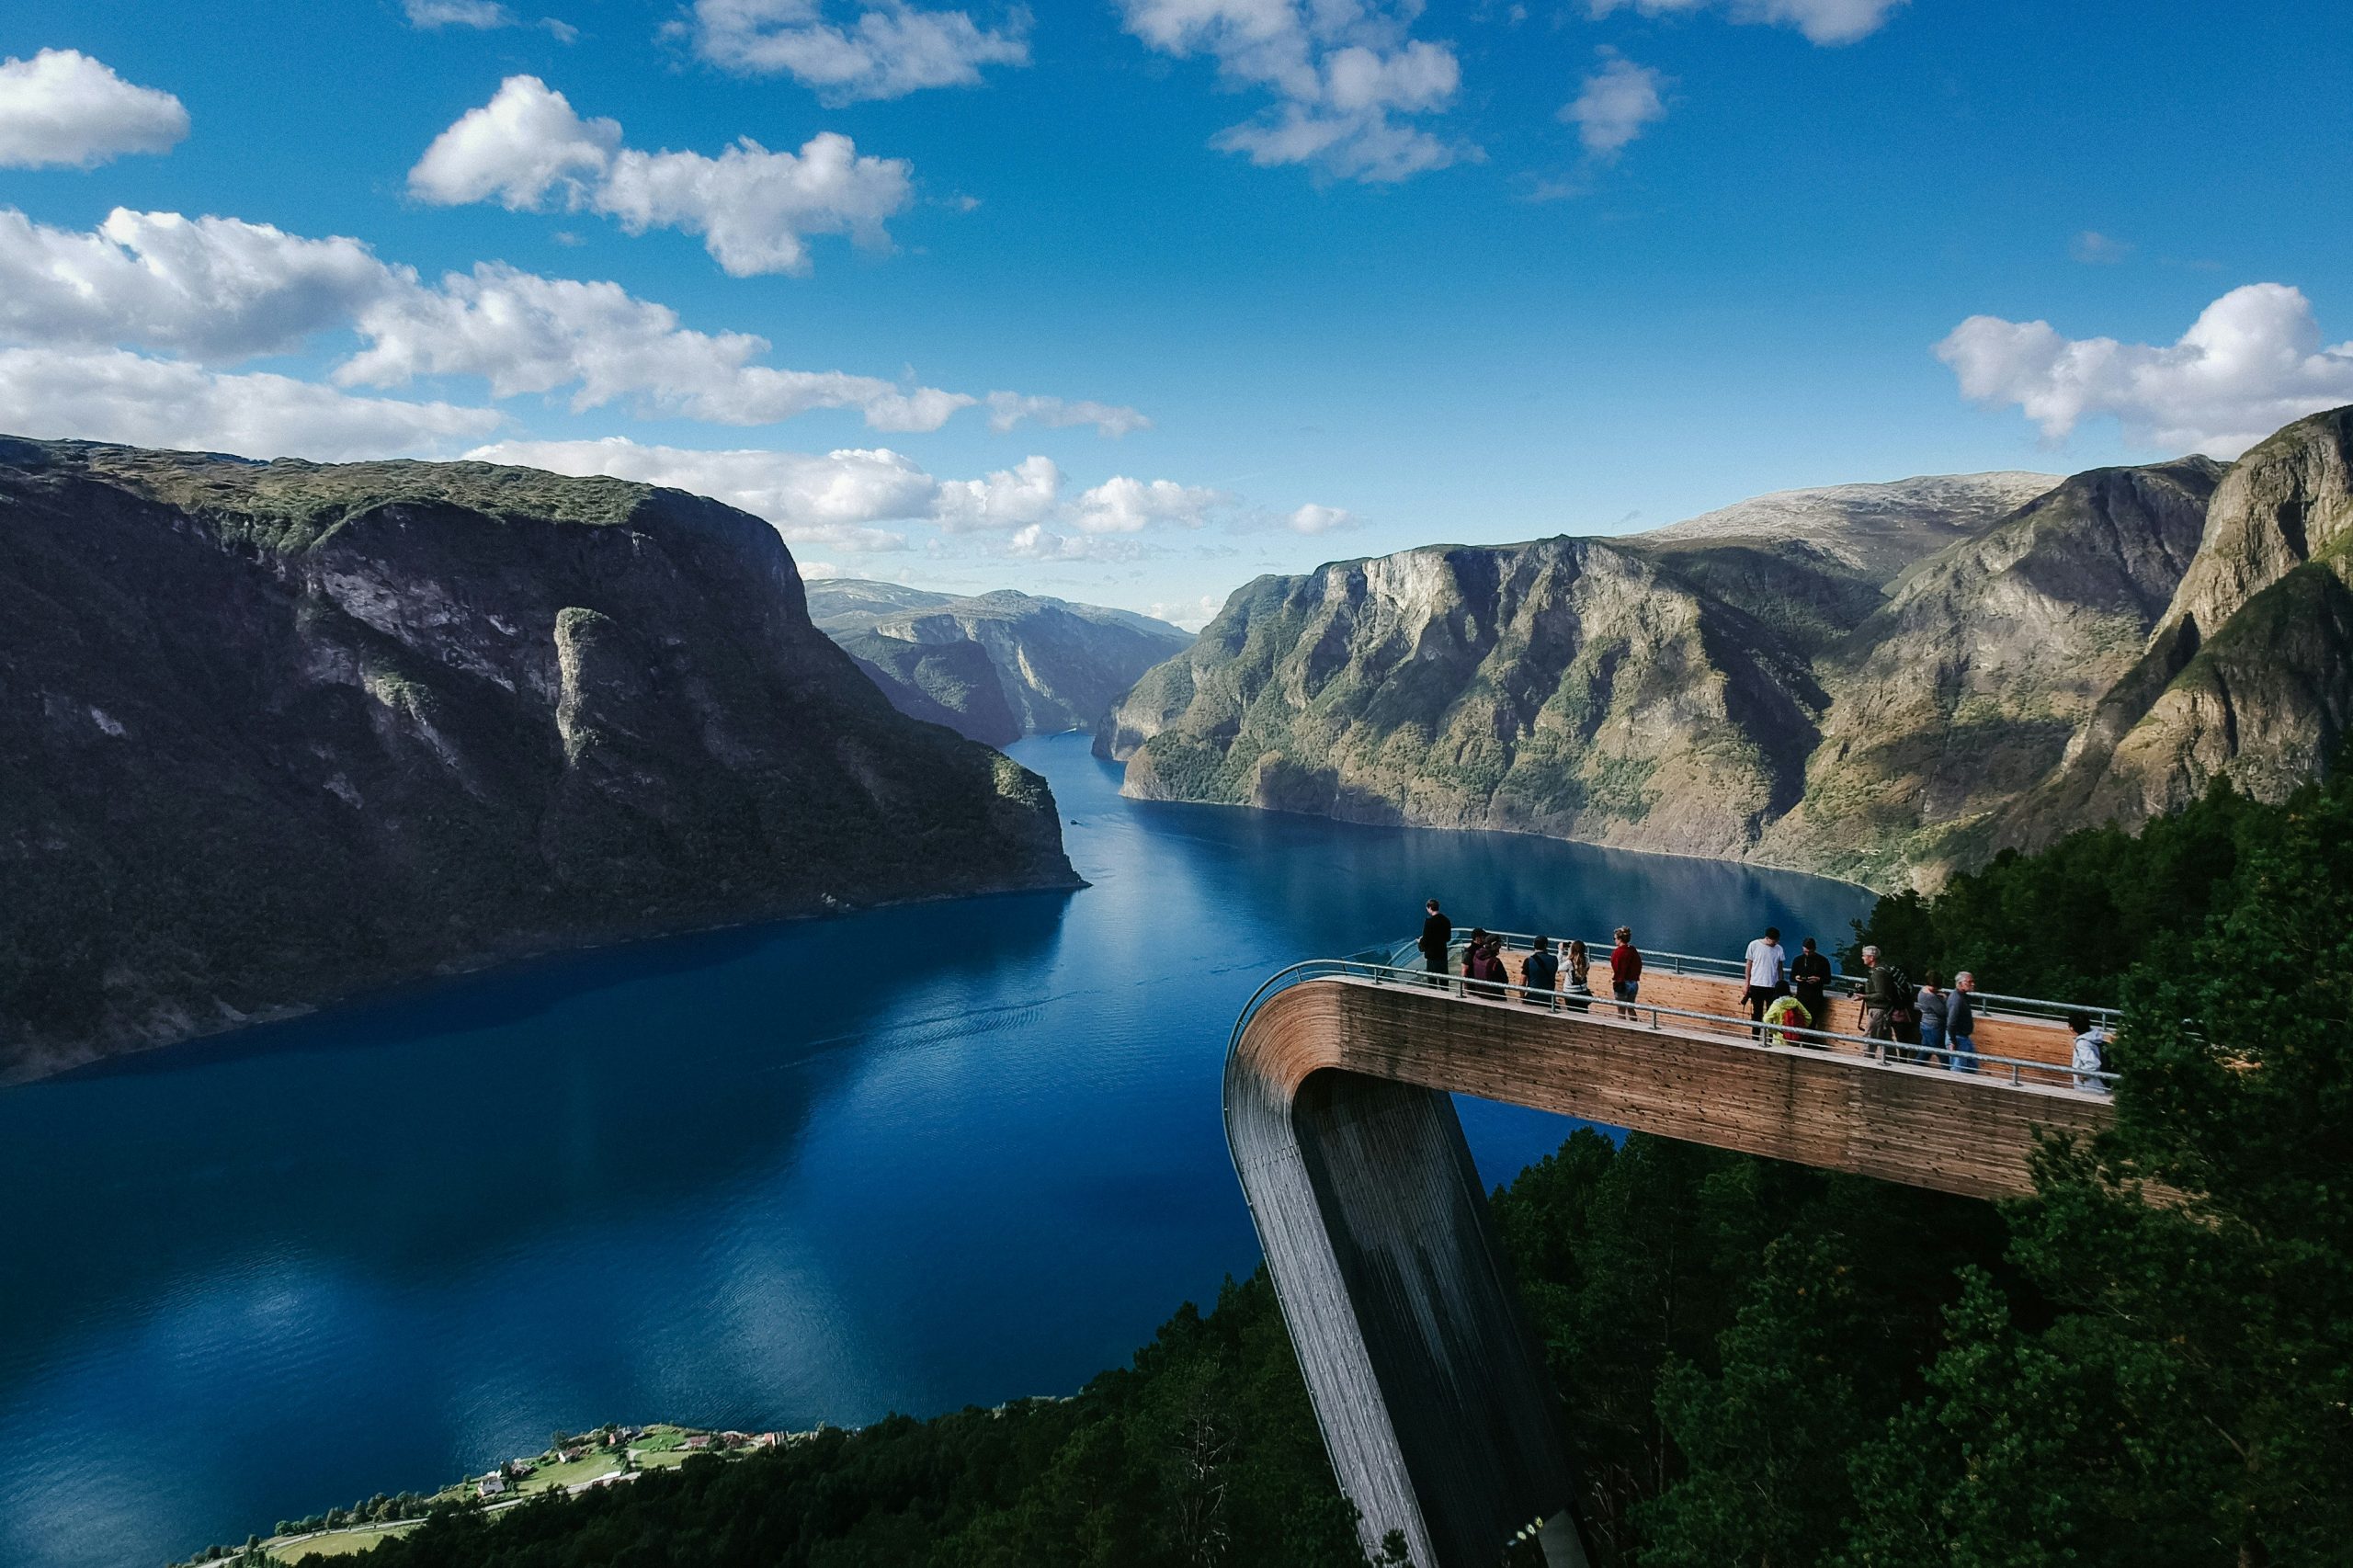 explore the breathtaking fjords of scandinavia and iceland, where majestic cliffs meet the crystal-clear waters of the north atlantic ocean.